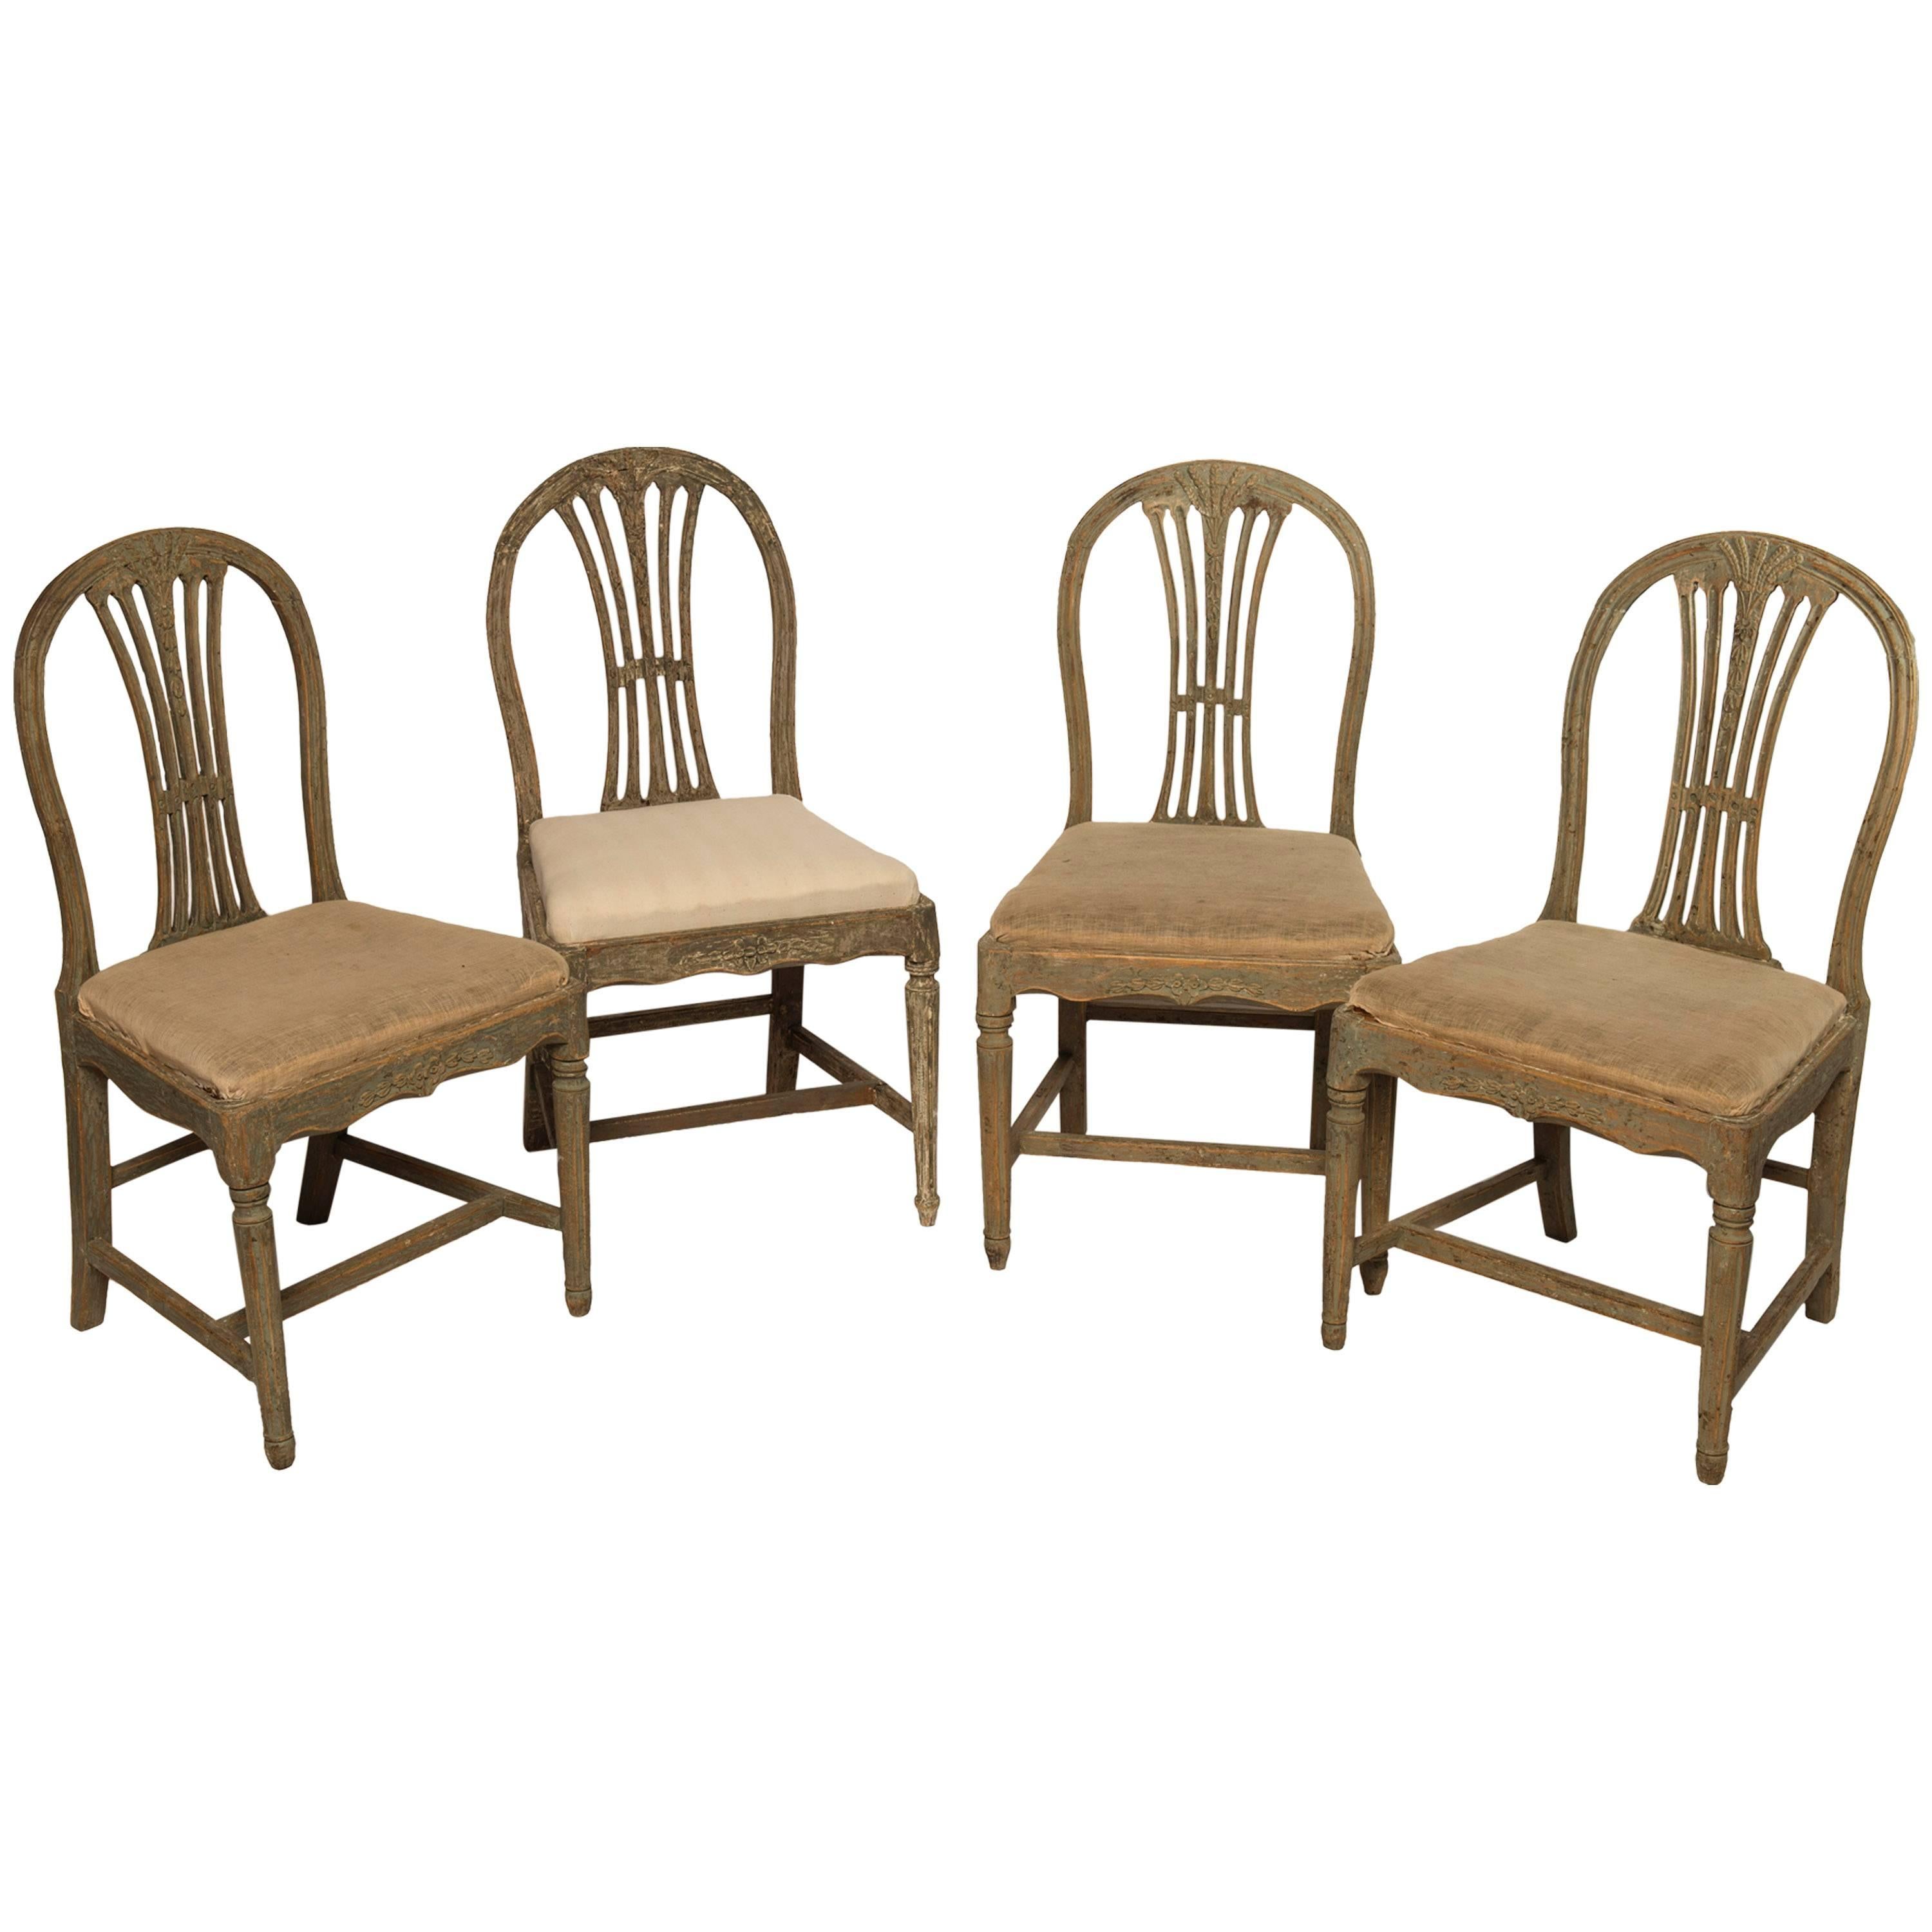 Matched Set of Four Gustavian Dining Chairs